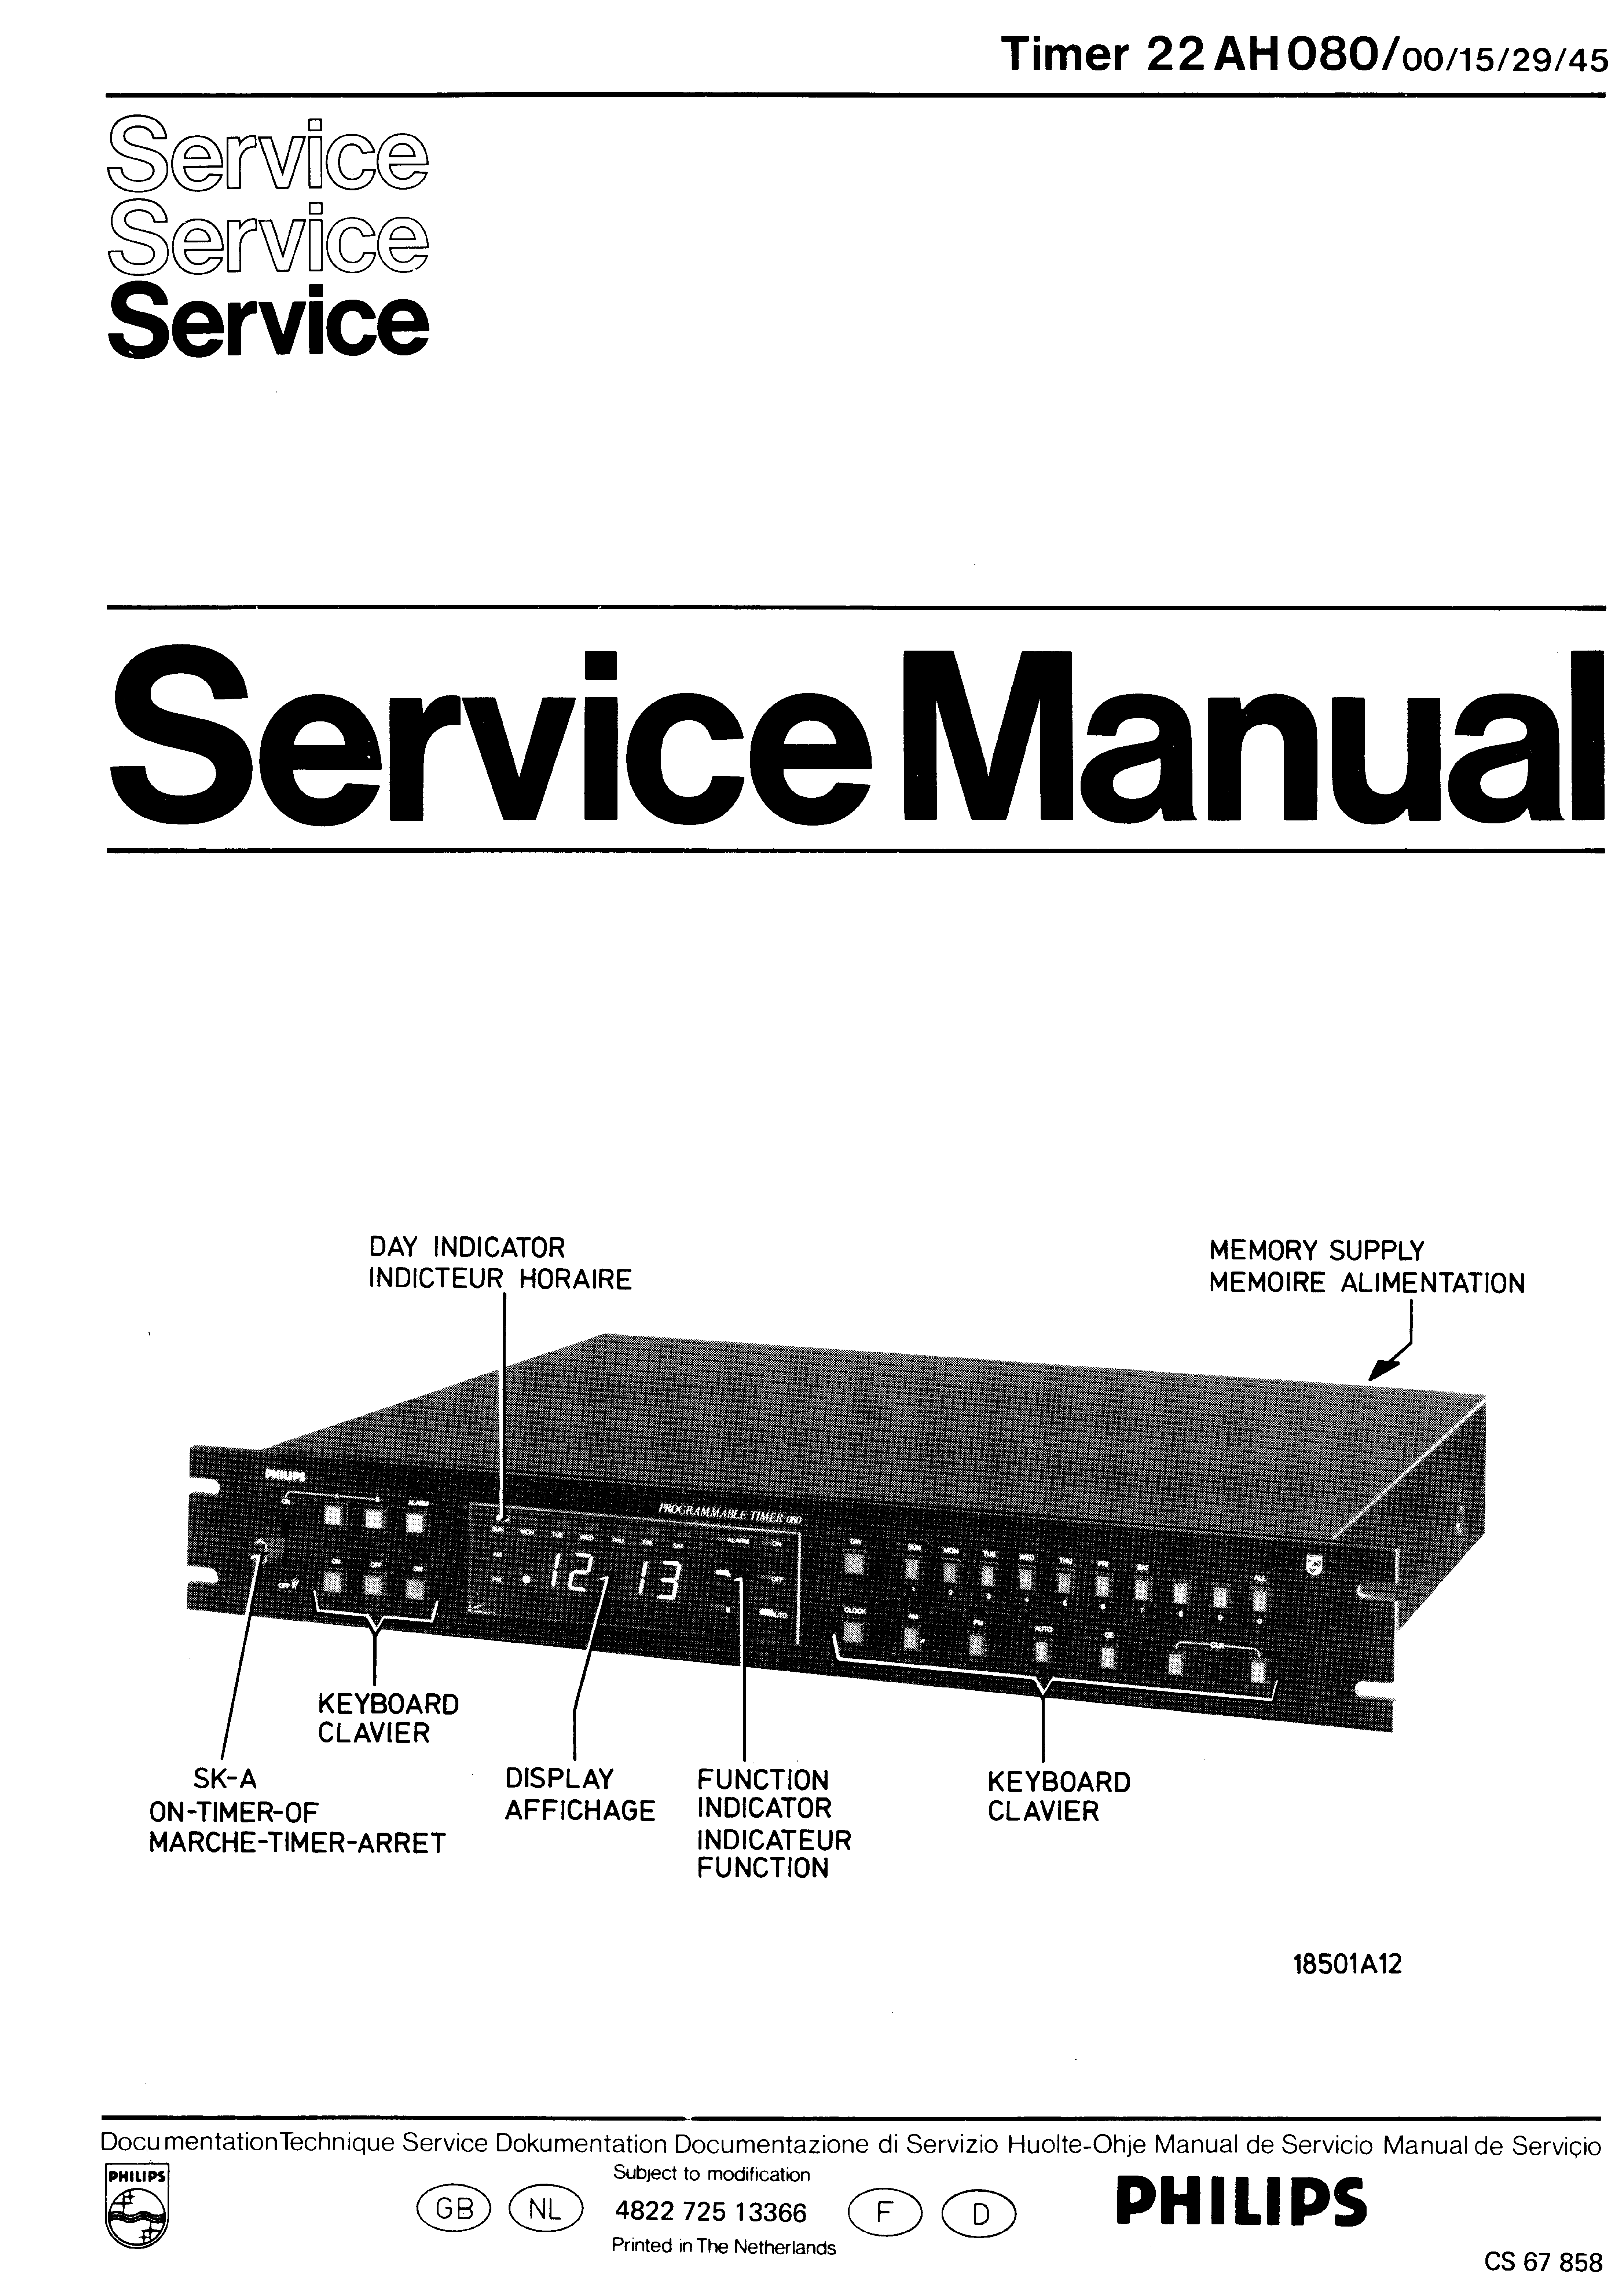 PHILIPS TIMER 22AH080 SM service manual (1st page)